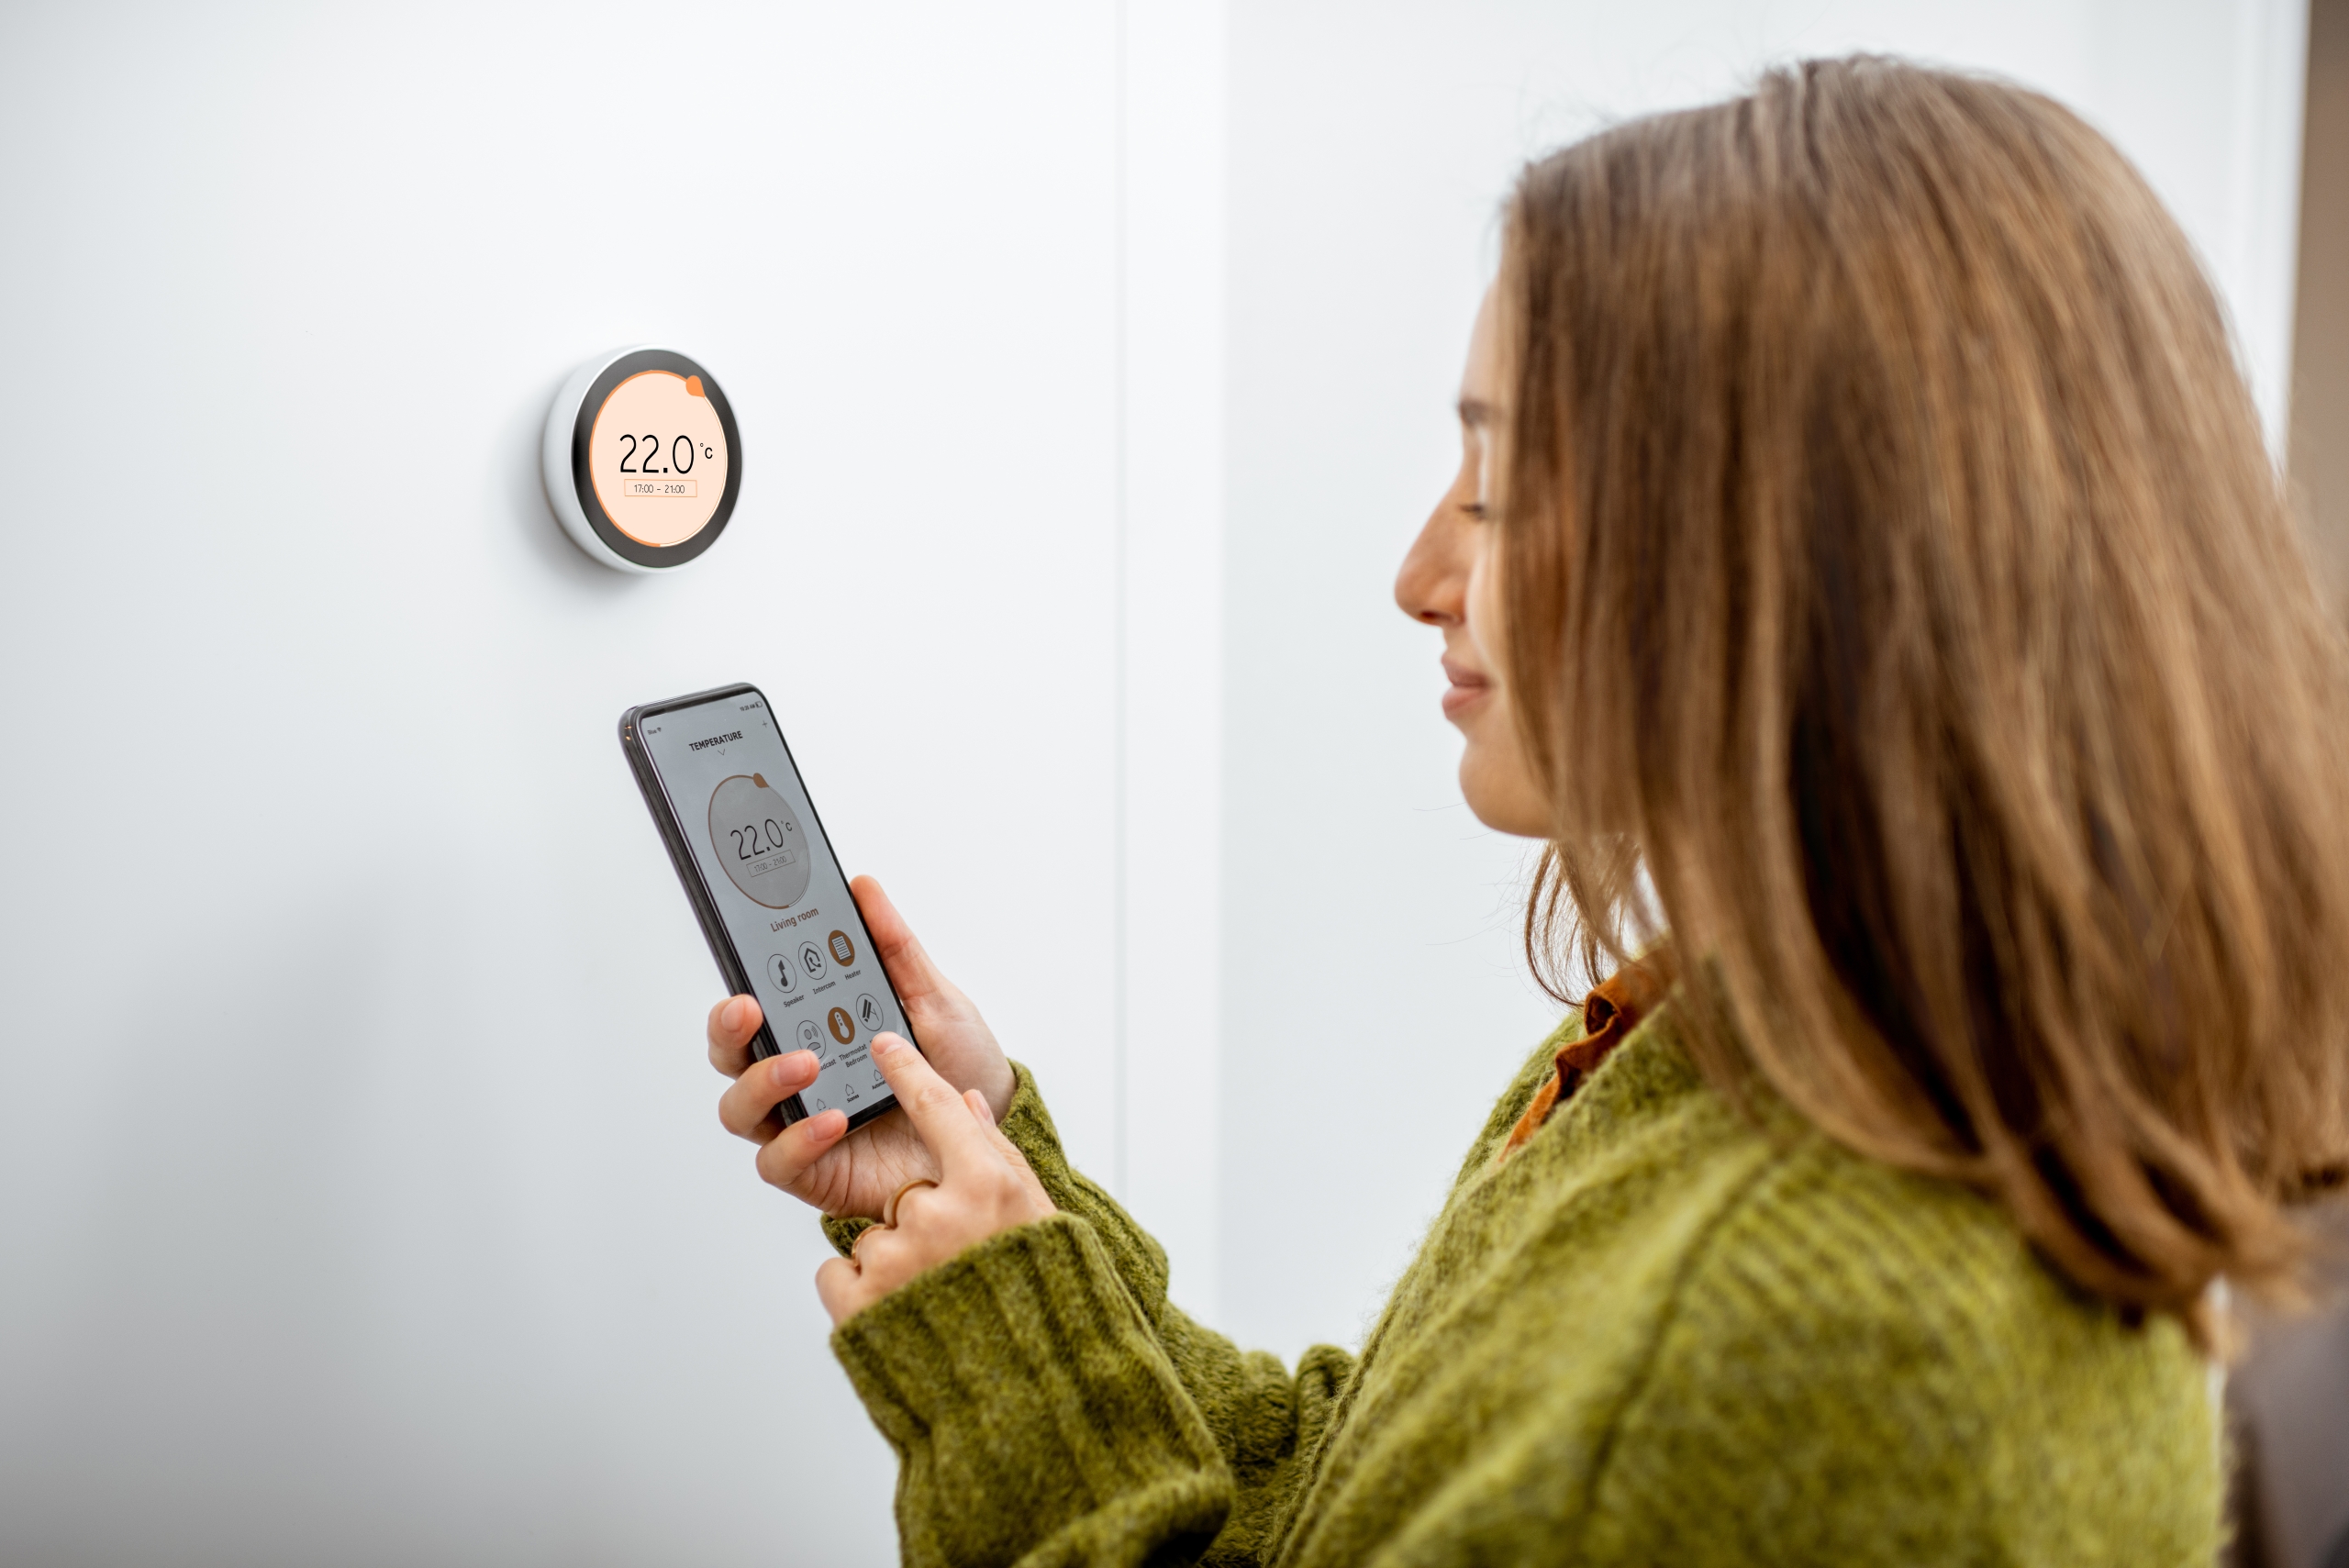 An Expert’s Choice for the Best Smart Thermostat